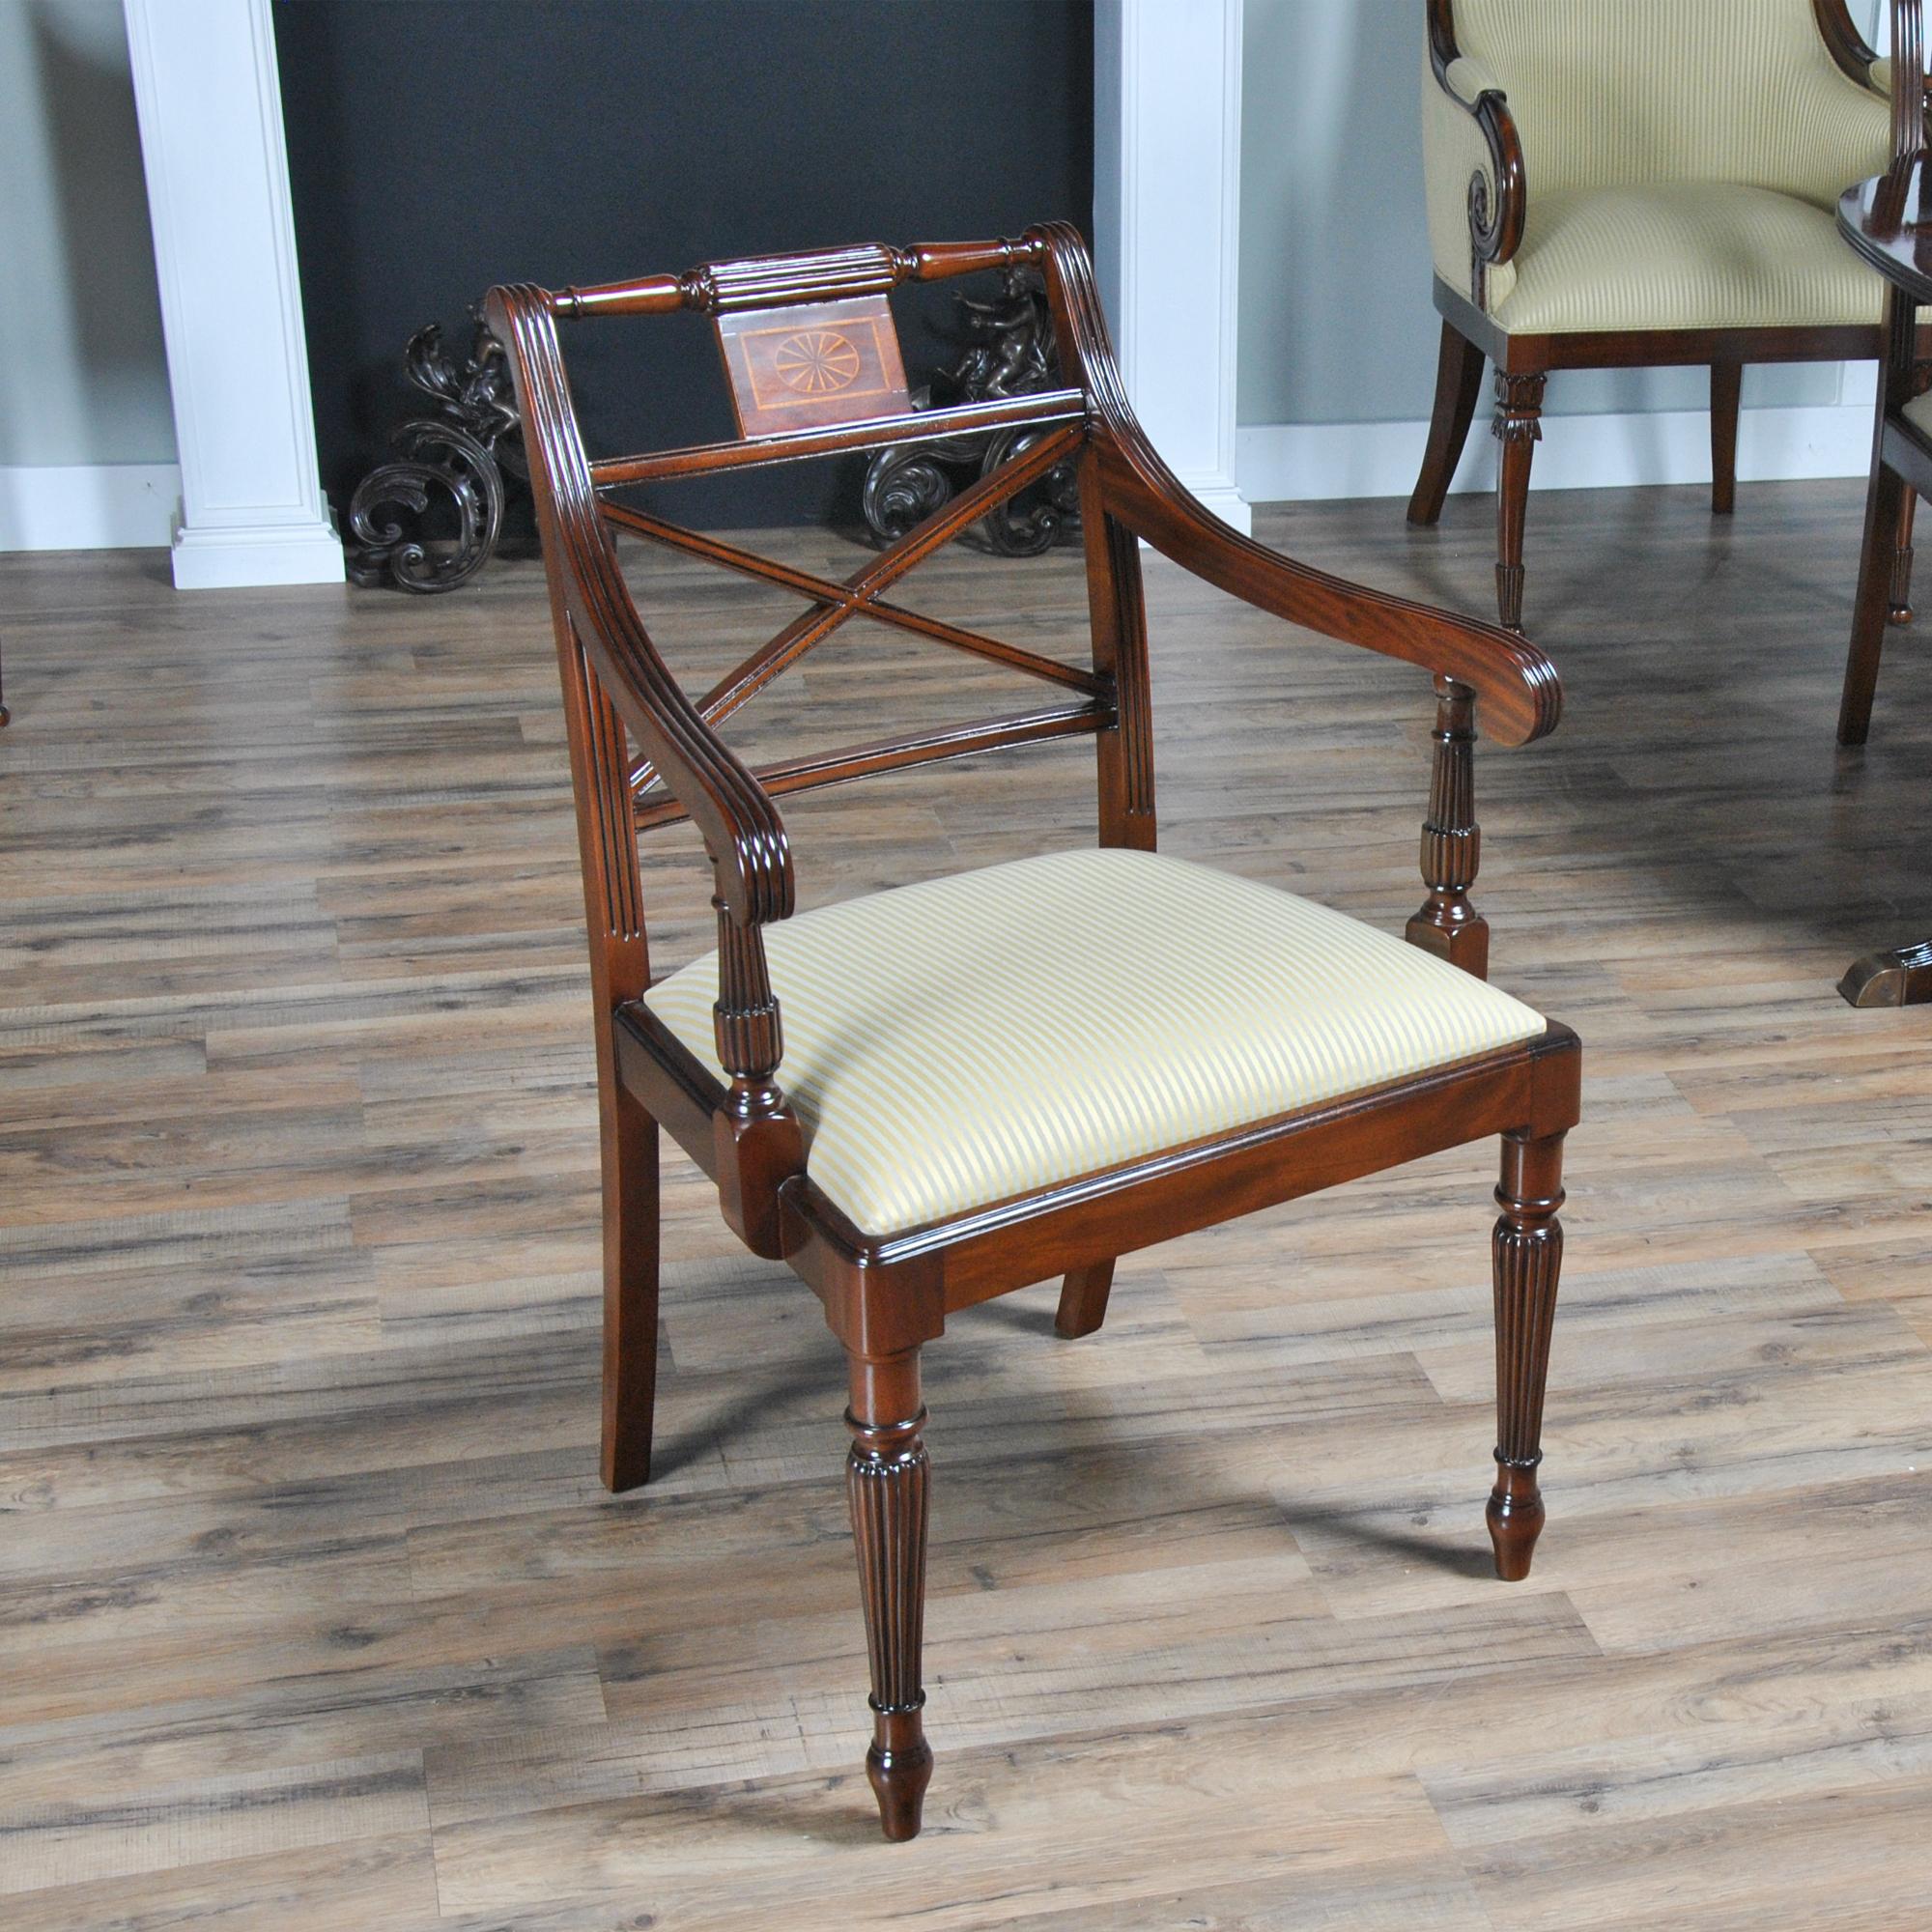 A set of ten Sheraton Mahogany Inlaid Chairs, these Sheraton inspired chairs have a lot of great features that set it apart from the competition. The chair is produced by skilled craftsmen using the finest quality, plantation grown solid mahogany.